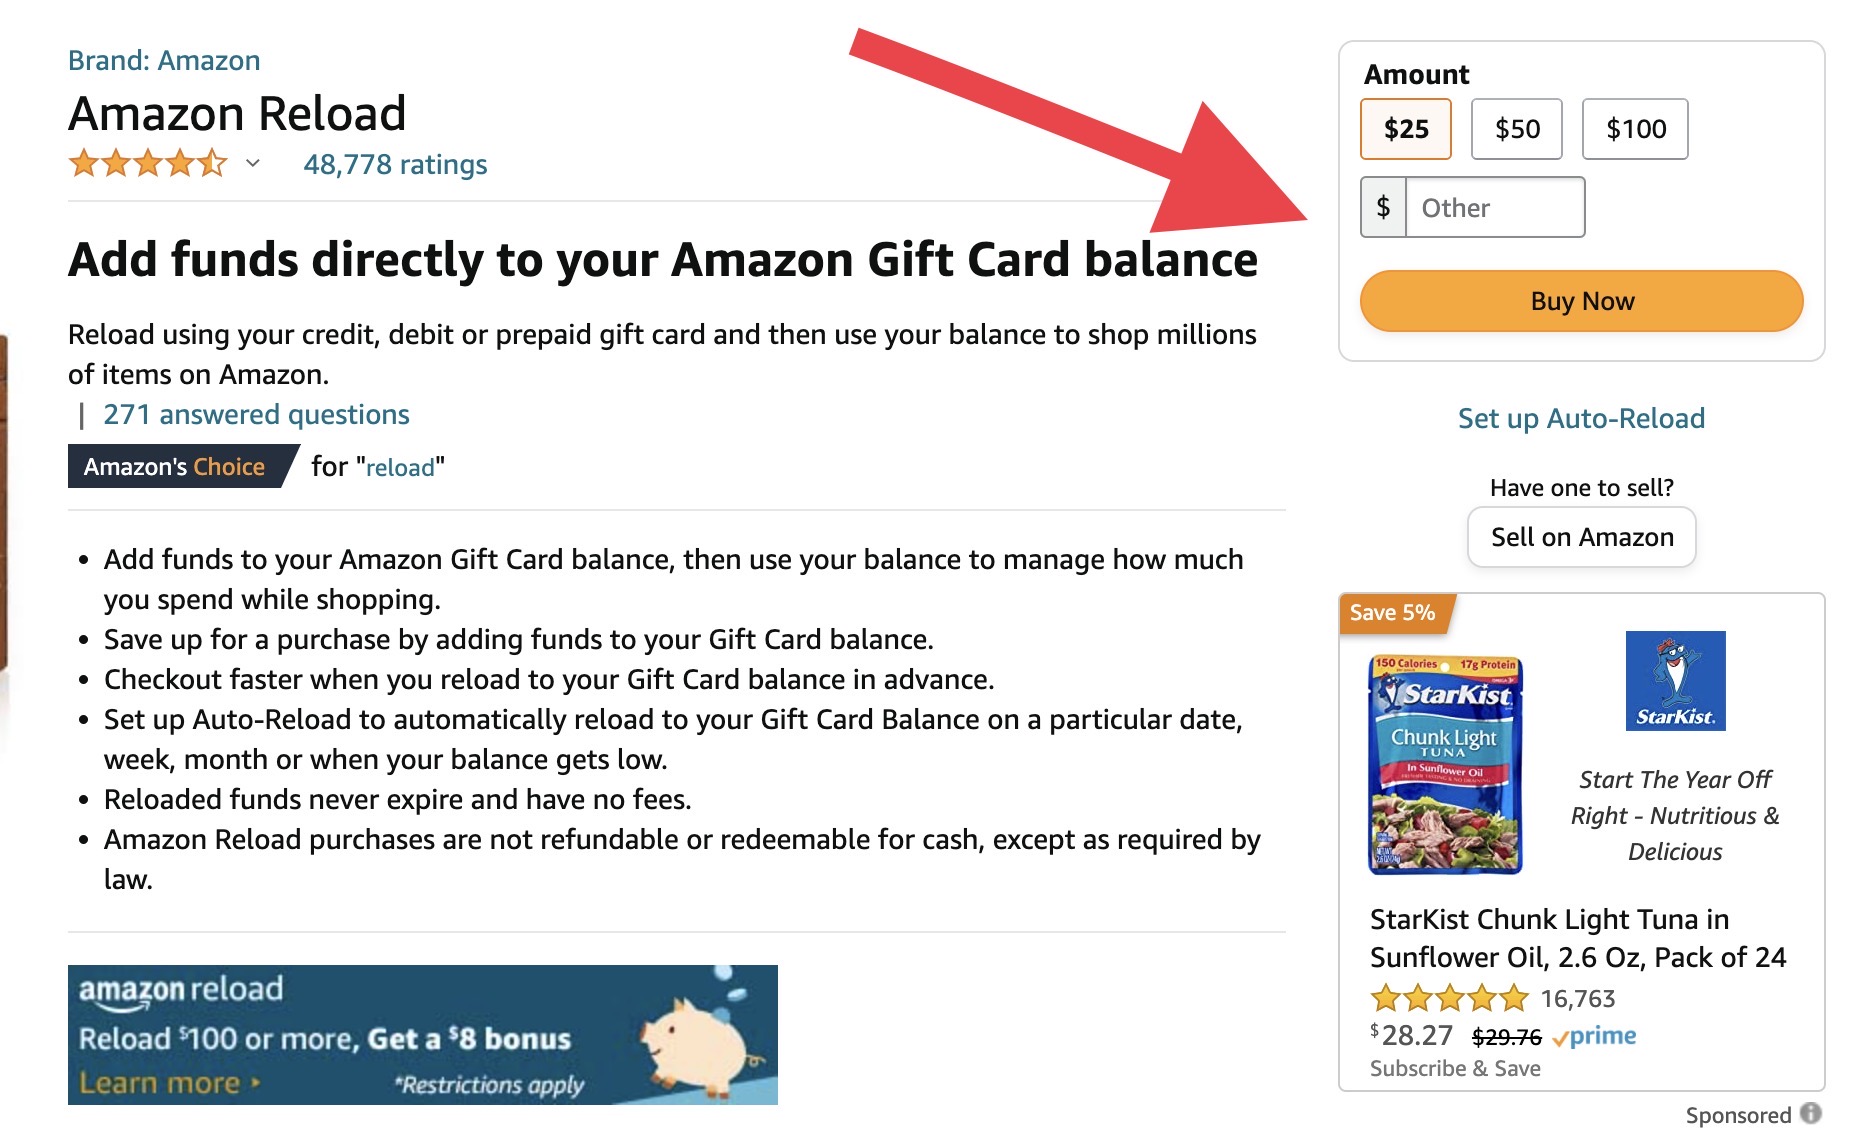 Can I Buy Amazon Gift Card With Visa Gift Card?